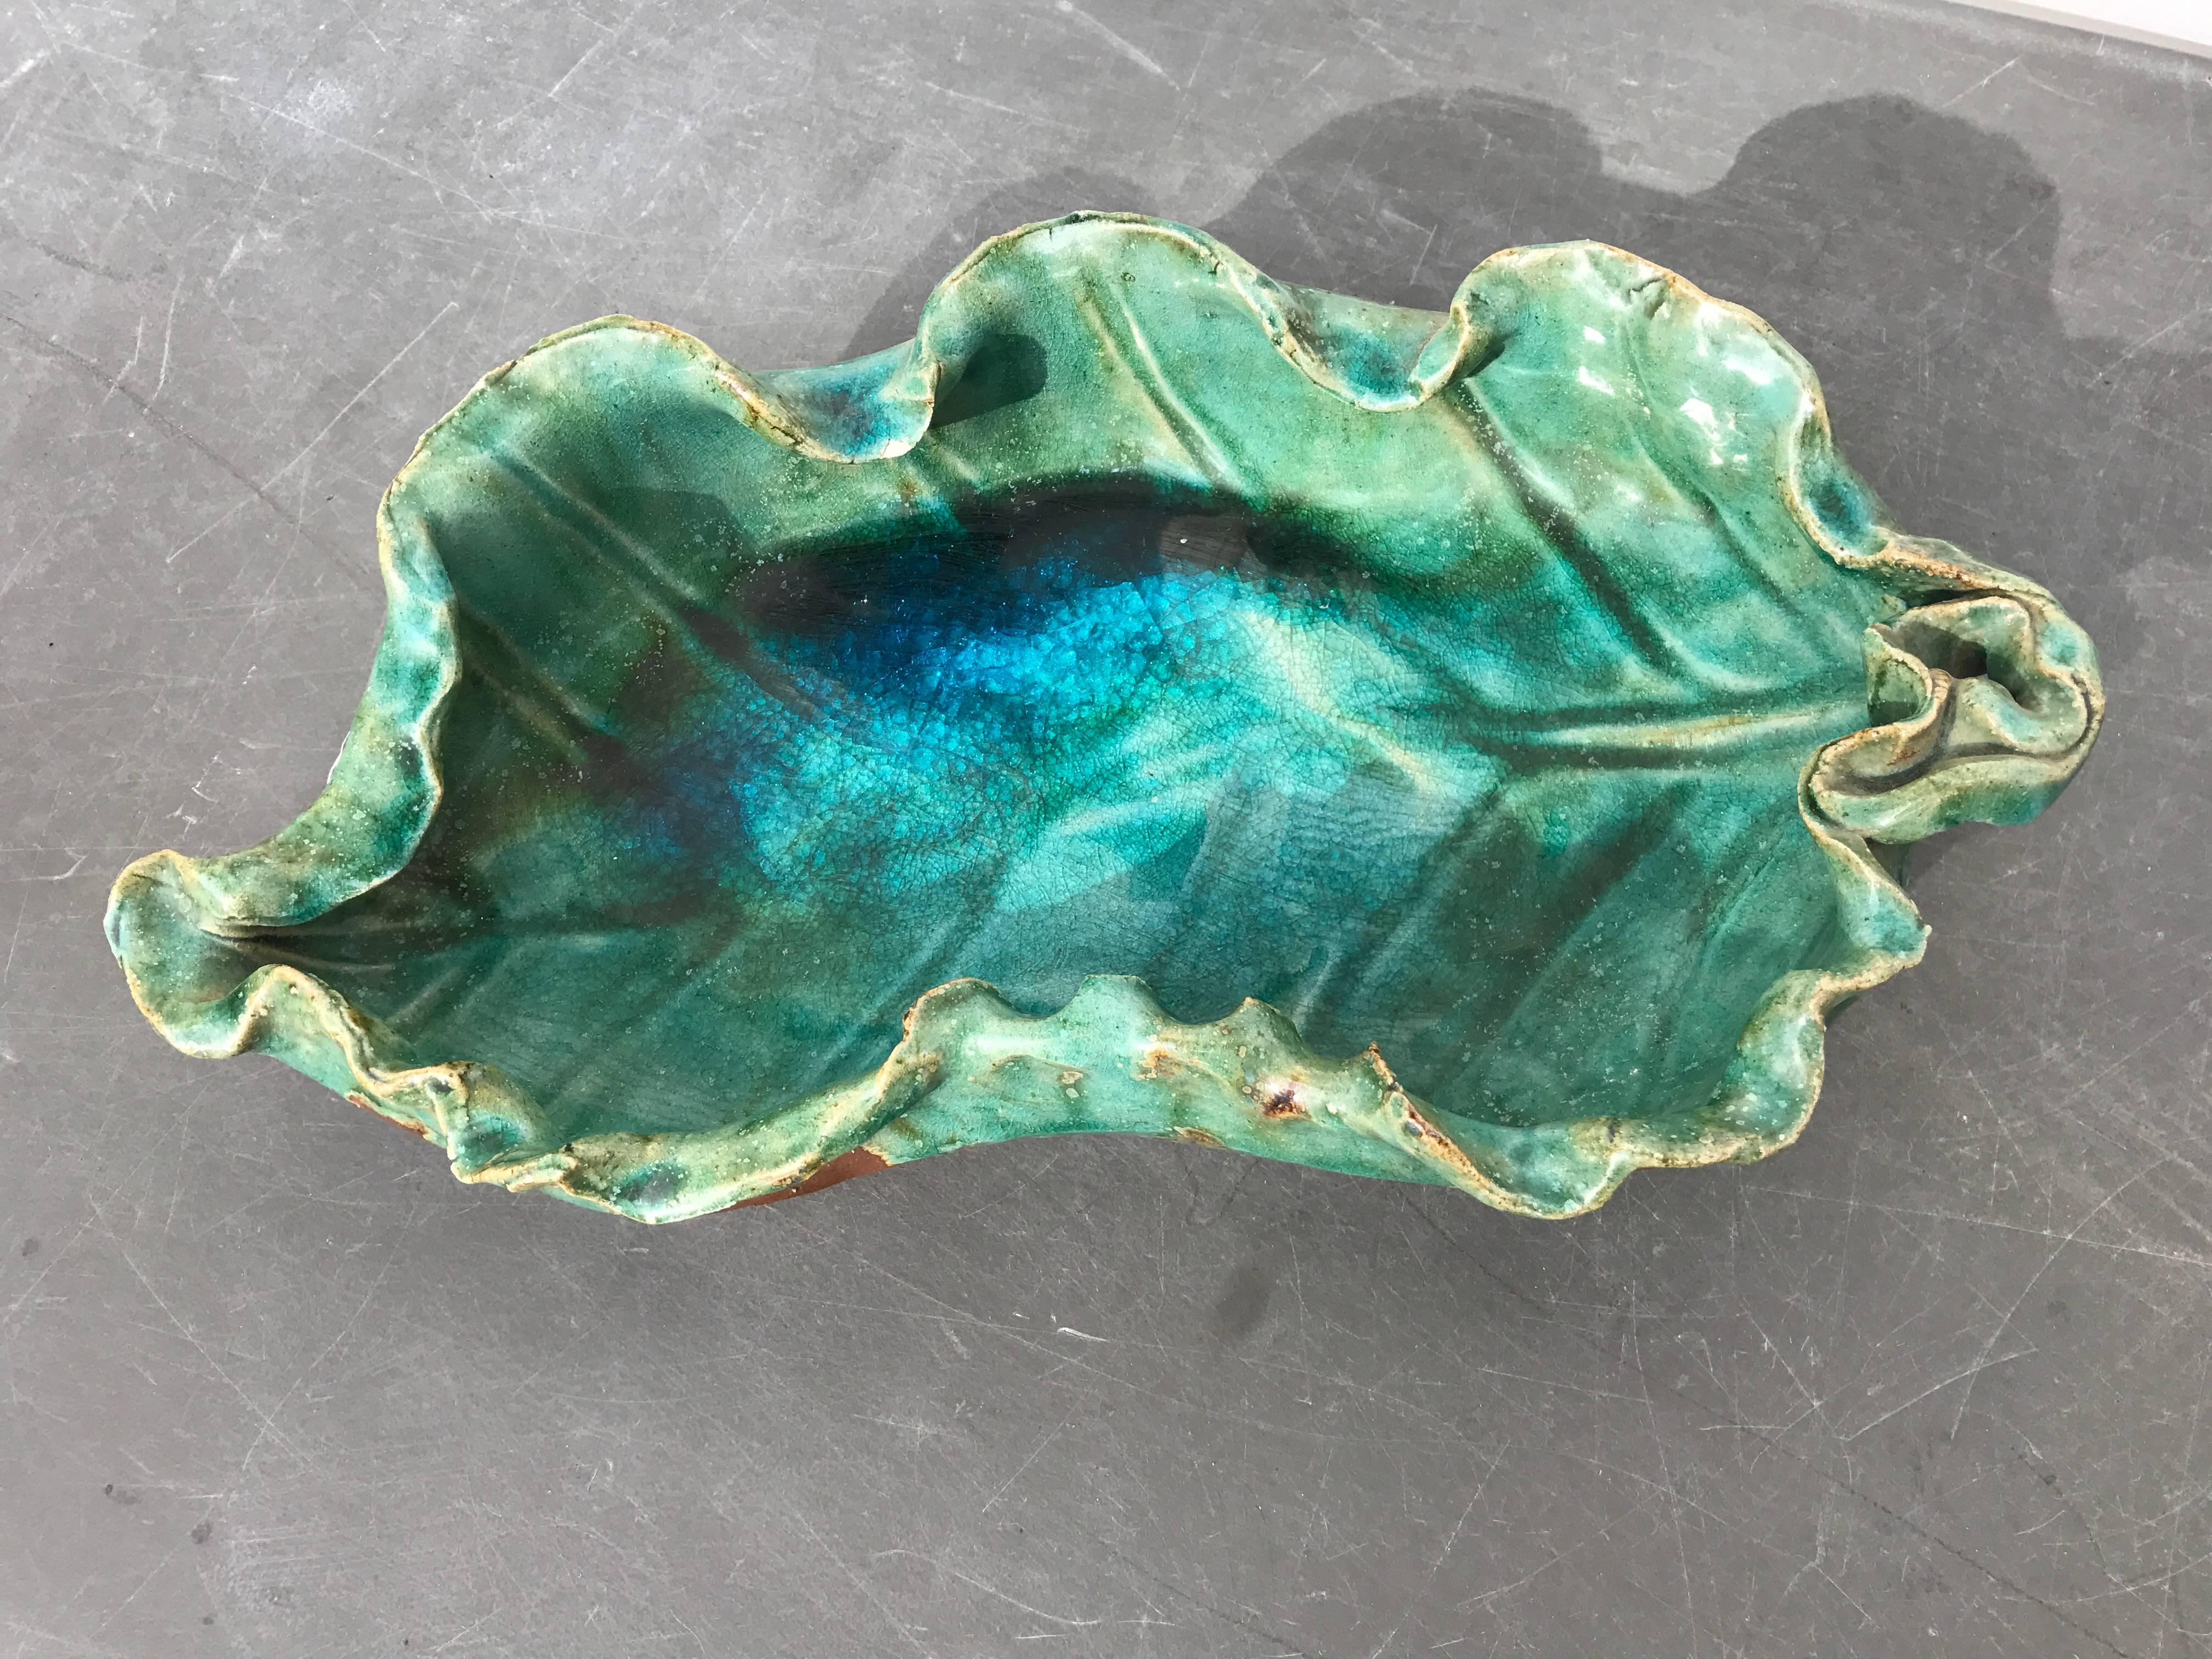 Japan, a stunning brilliant blue green glazed scalloped edge bowl - completely hand thrown and hand glazed.- a tour de force of color and form only a Japanese master Artisan could perform.

Hand glazed one-of-a-kind heavy thick stone ware vessel